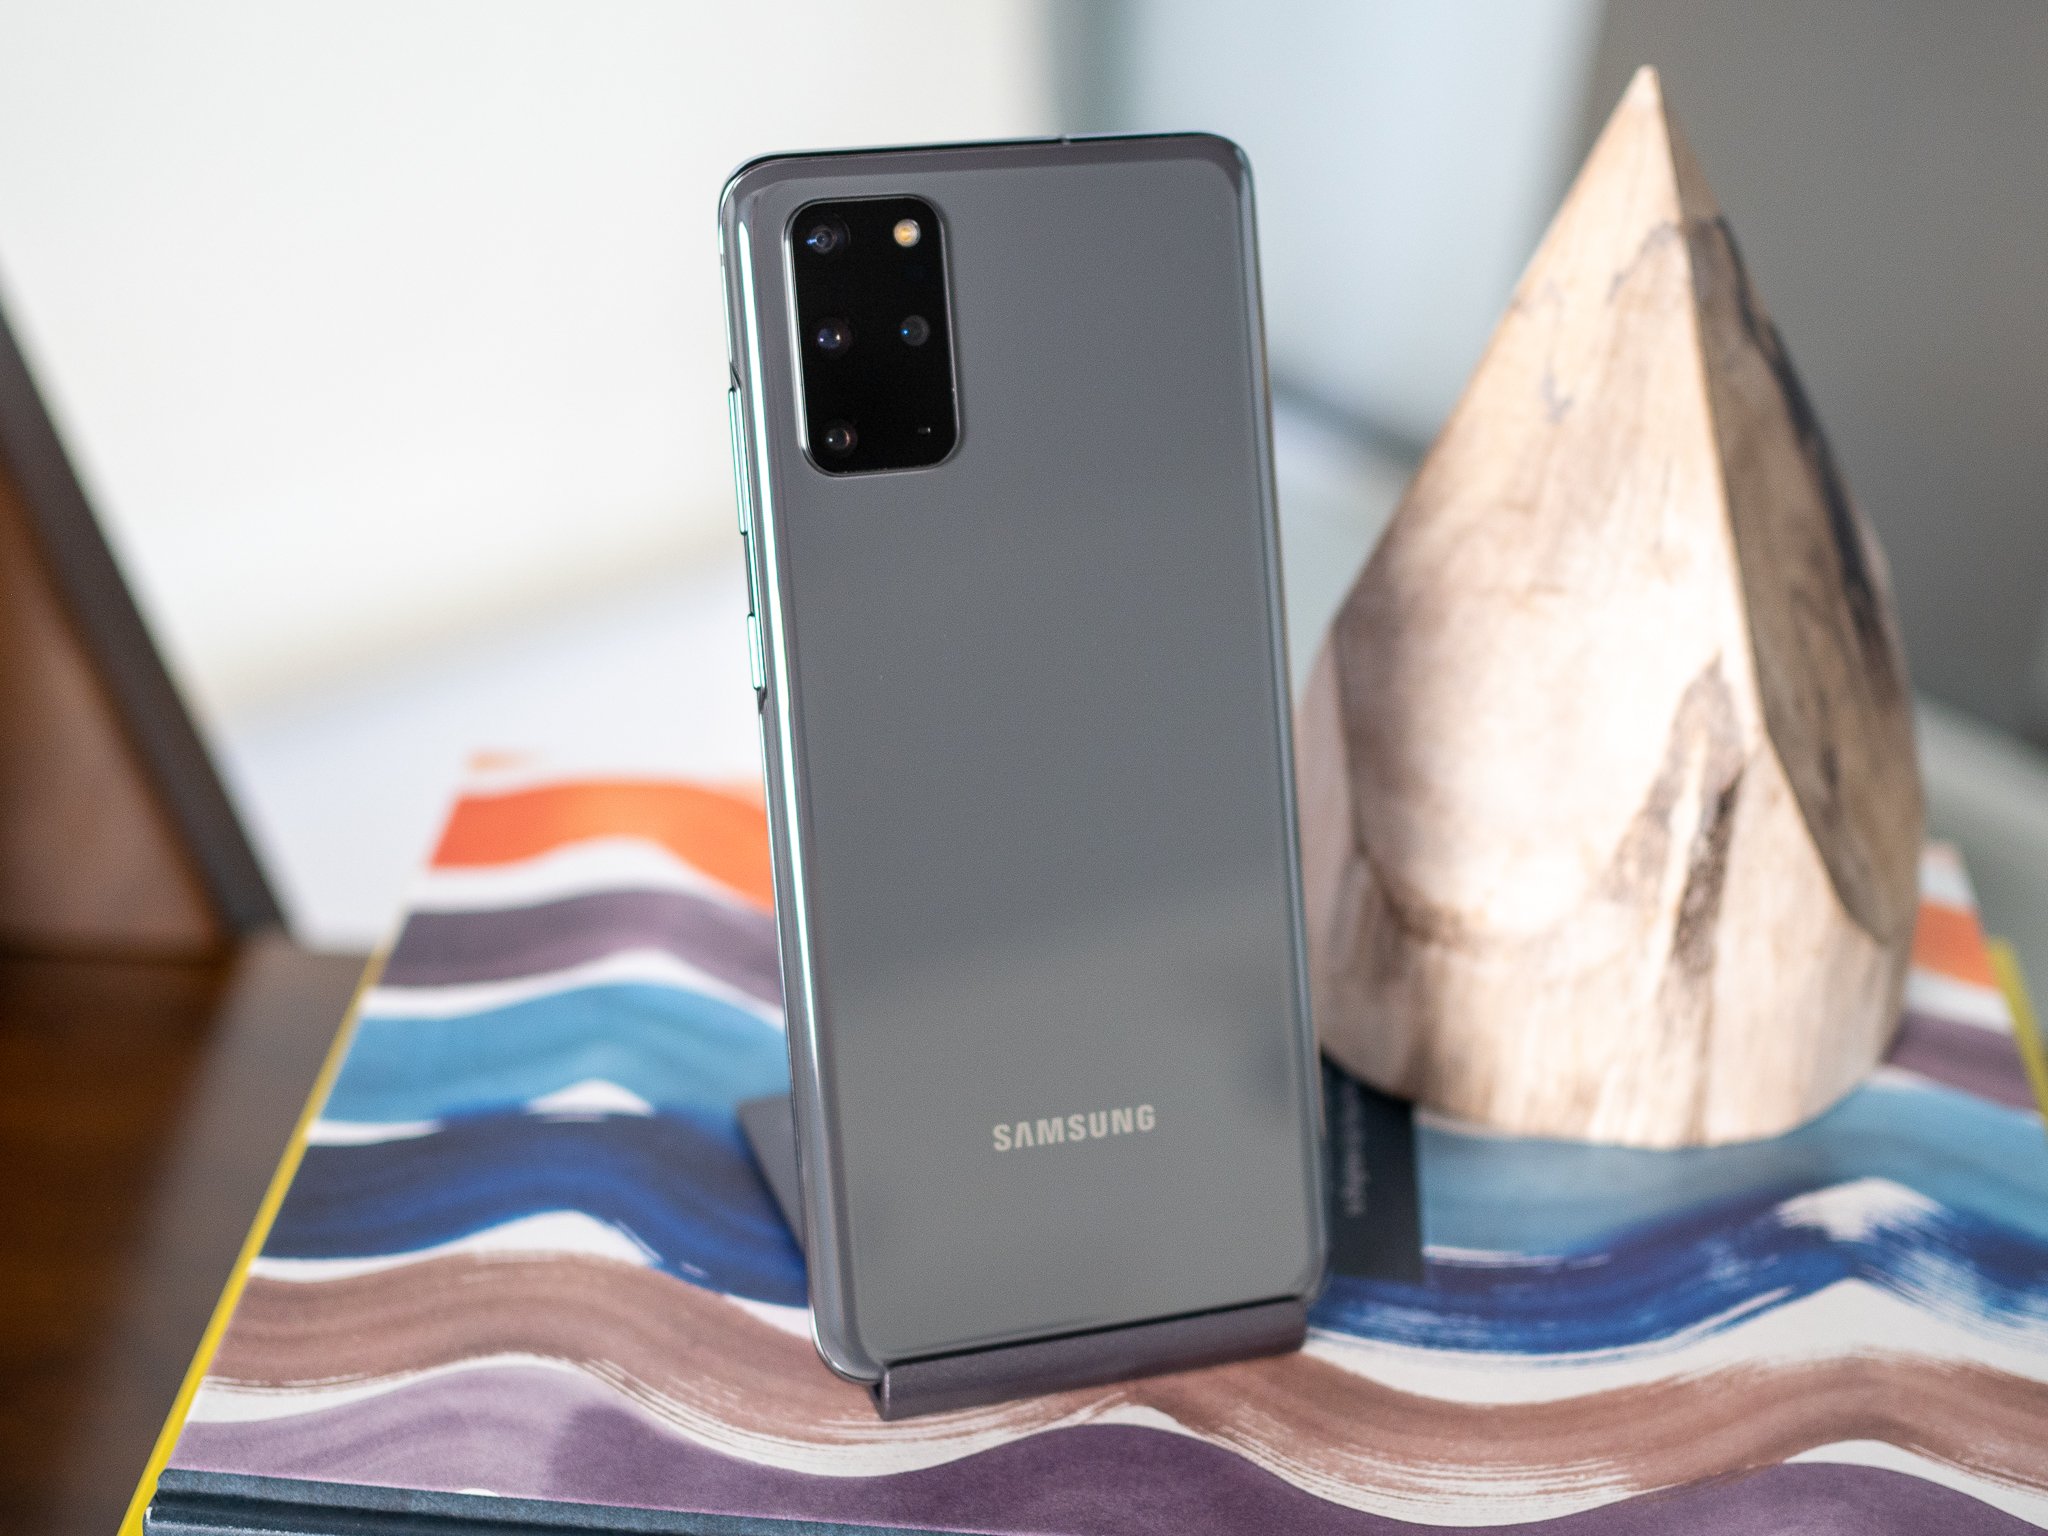 Samsung Galaxy S20+ was the best-selling 5G phone in the U.S. in Q1 2020 thumbnail